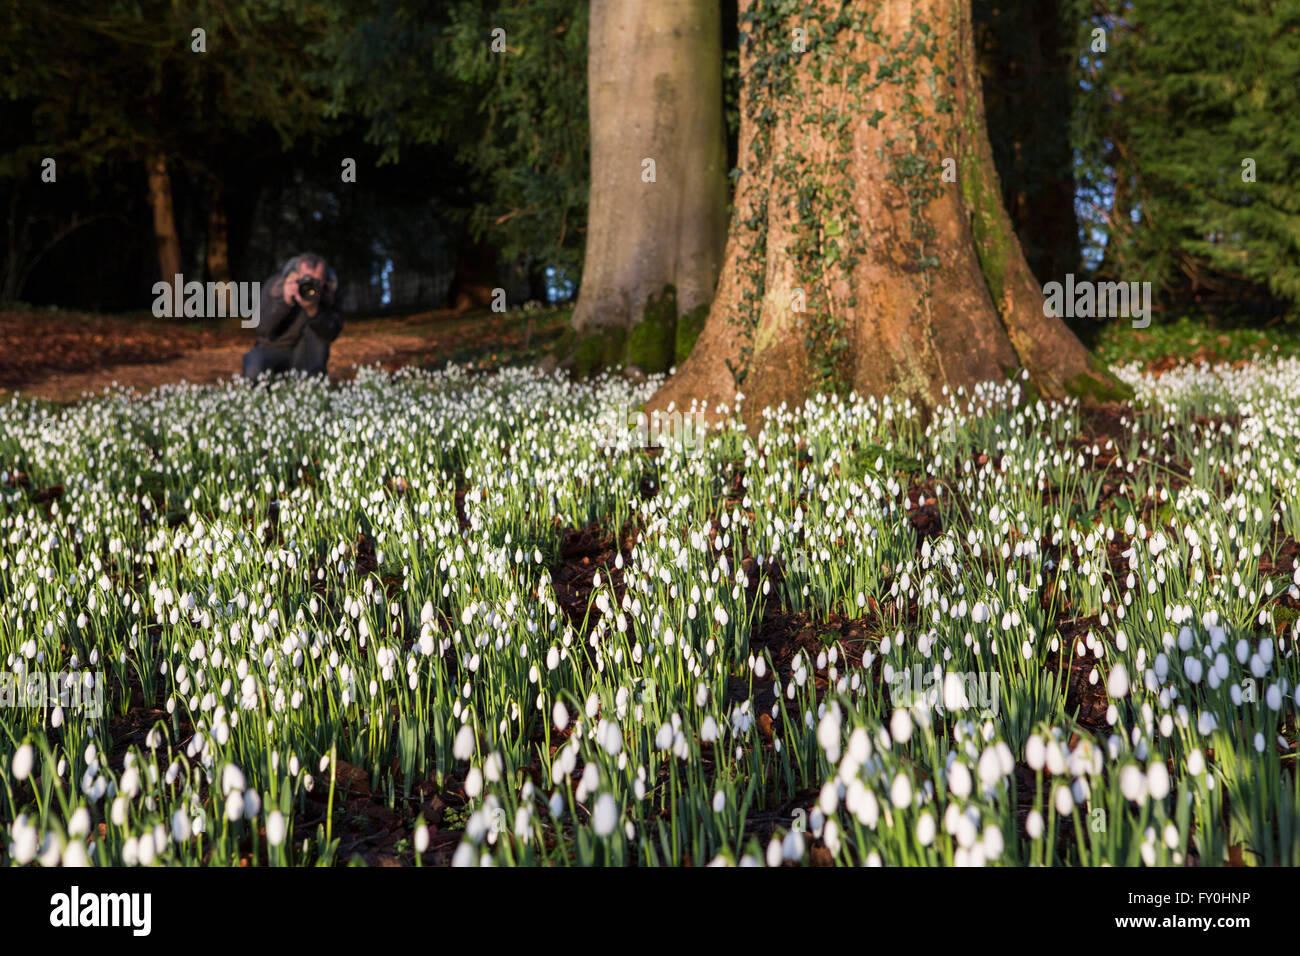 Colesbourne Park Snowdrop collection, near Cheltenham, UK opens its doors to the public this weekend January 30th. The Park contains over 250 rare and unusual varieties of snowdrop and is considered to be 'England's greatest snowdrop garden' (country life). Head Gardener Chris Horsefall takes some final pictures before the gardens open this weekend. Stock Photo